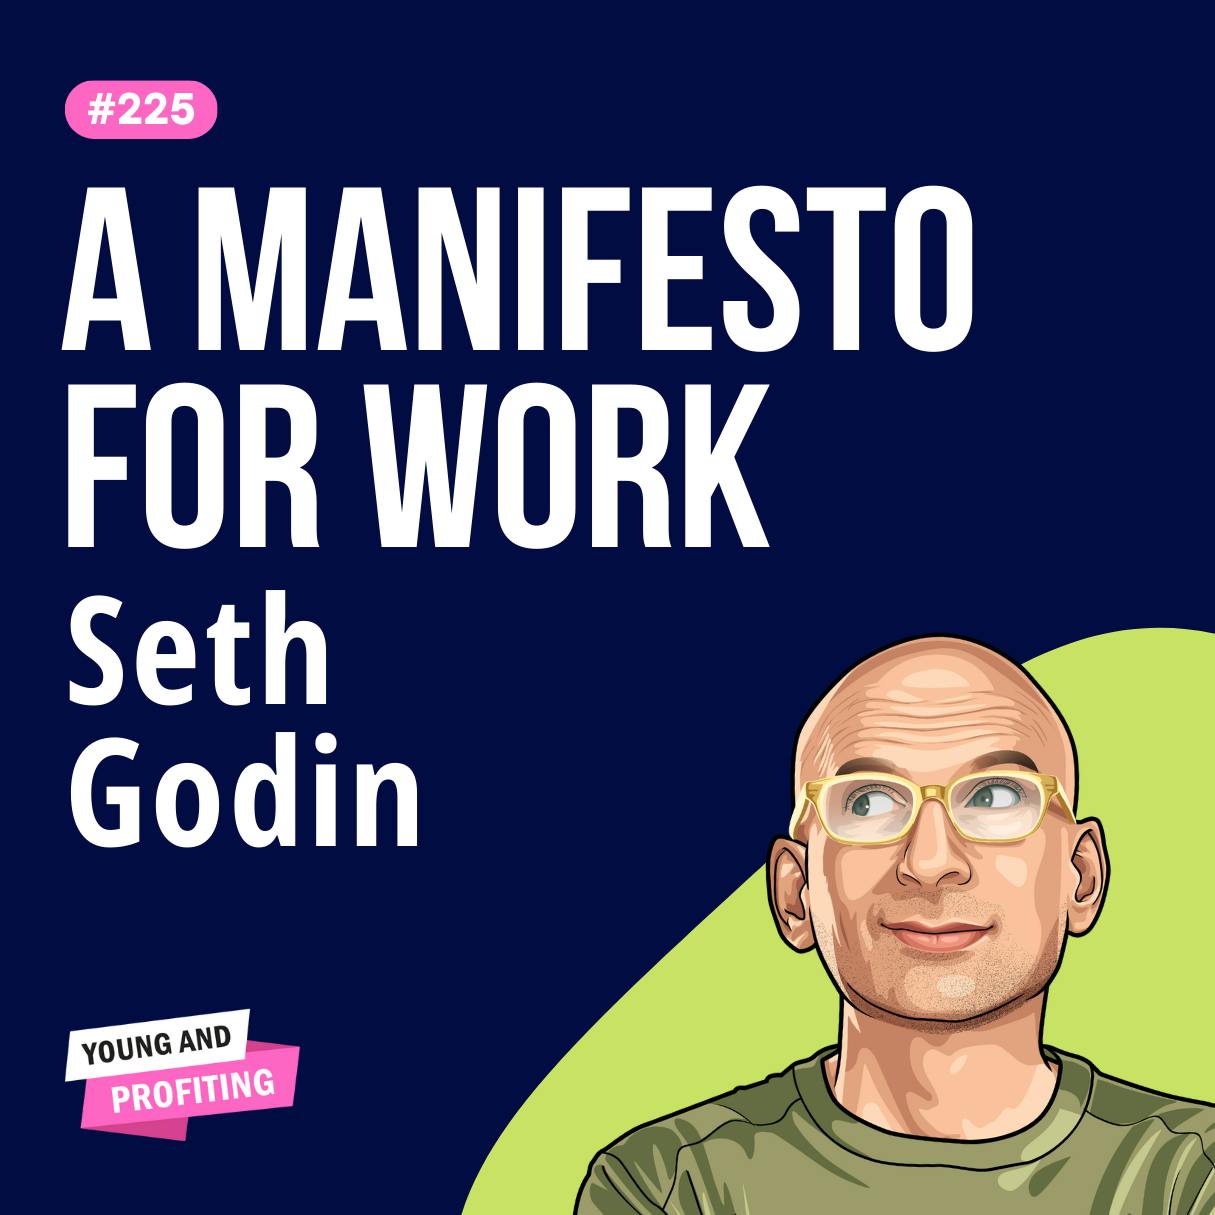 Seth Godin: Why Employee Productivity Is at a 70-Year Low and What to Do About It